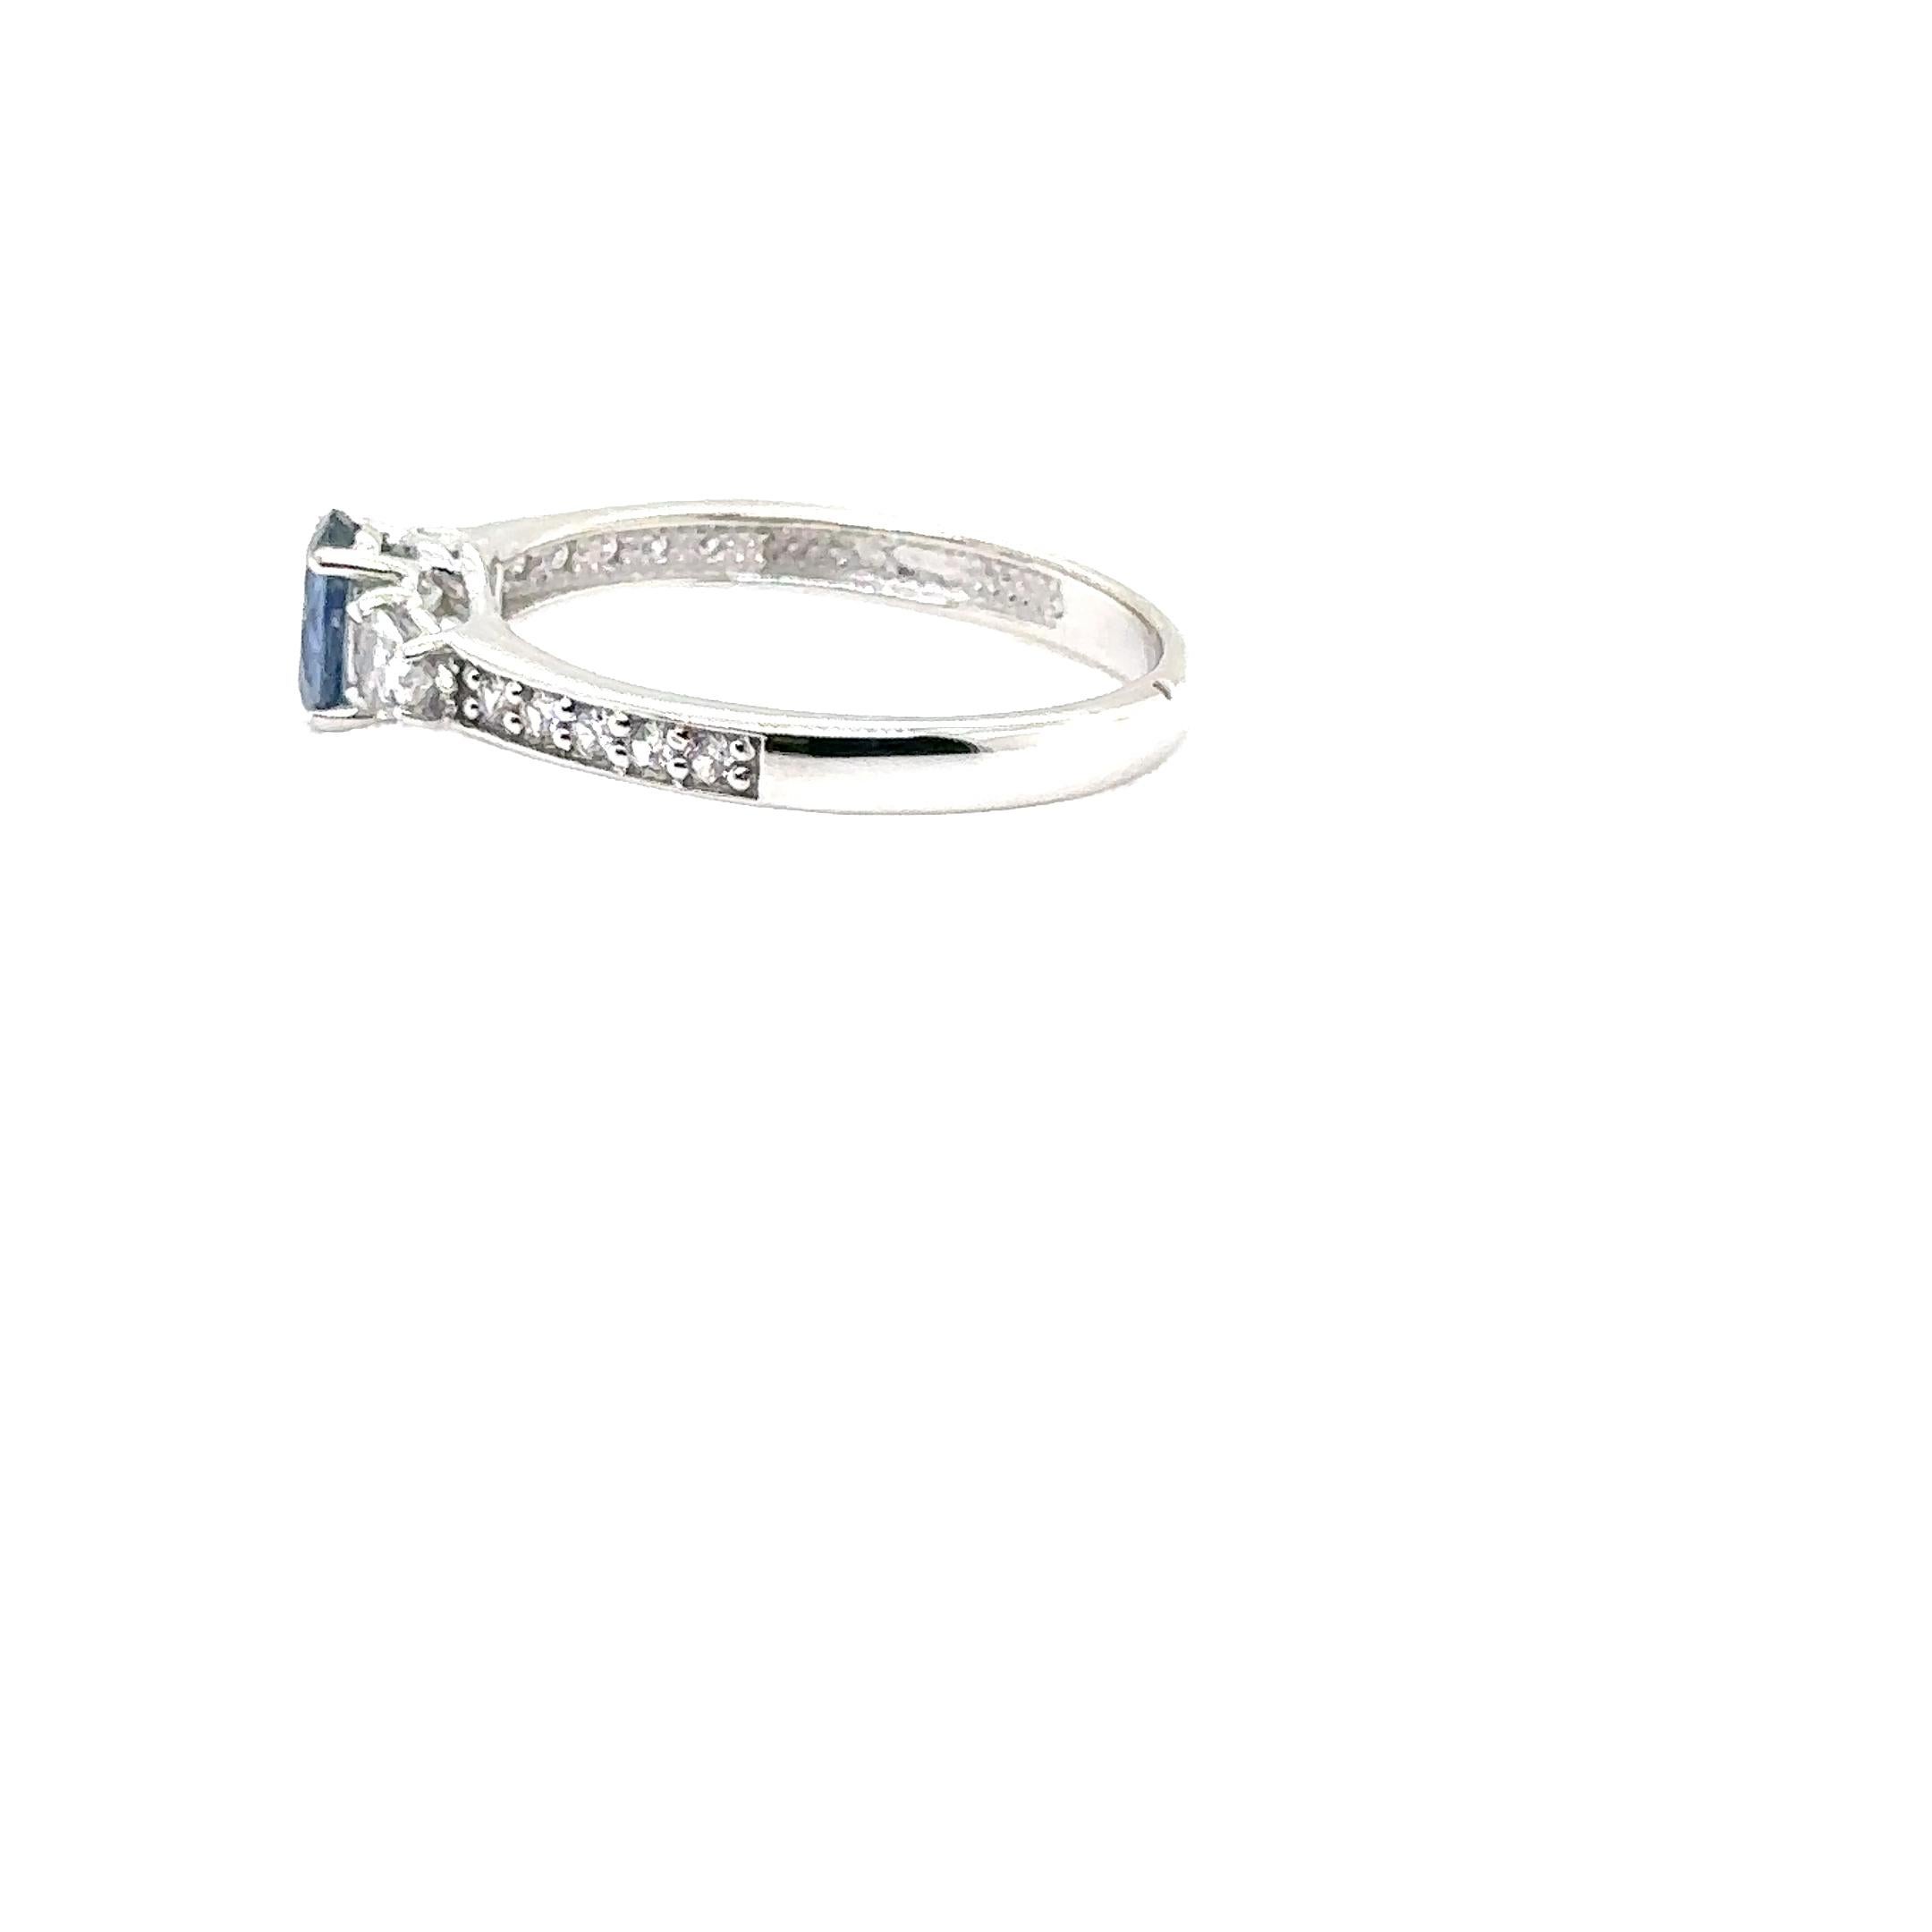 14K WHITE GOLD OVAL SAPPHIRE RING with WHITE SAPPHIRES & DIAMONDS
Metal: 14K WHITE GOLD
Diamond Info: GH-SI DIAMONDS 0.20CT
Stones Info: 6X4 OVAL SAPPHIRE 0.60CT
        4x3 PEARSHAPE WHITE SAPPHIRES 0.20CT
Total Dia Weight: 0.20 cwt.
Total Stones